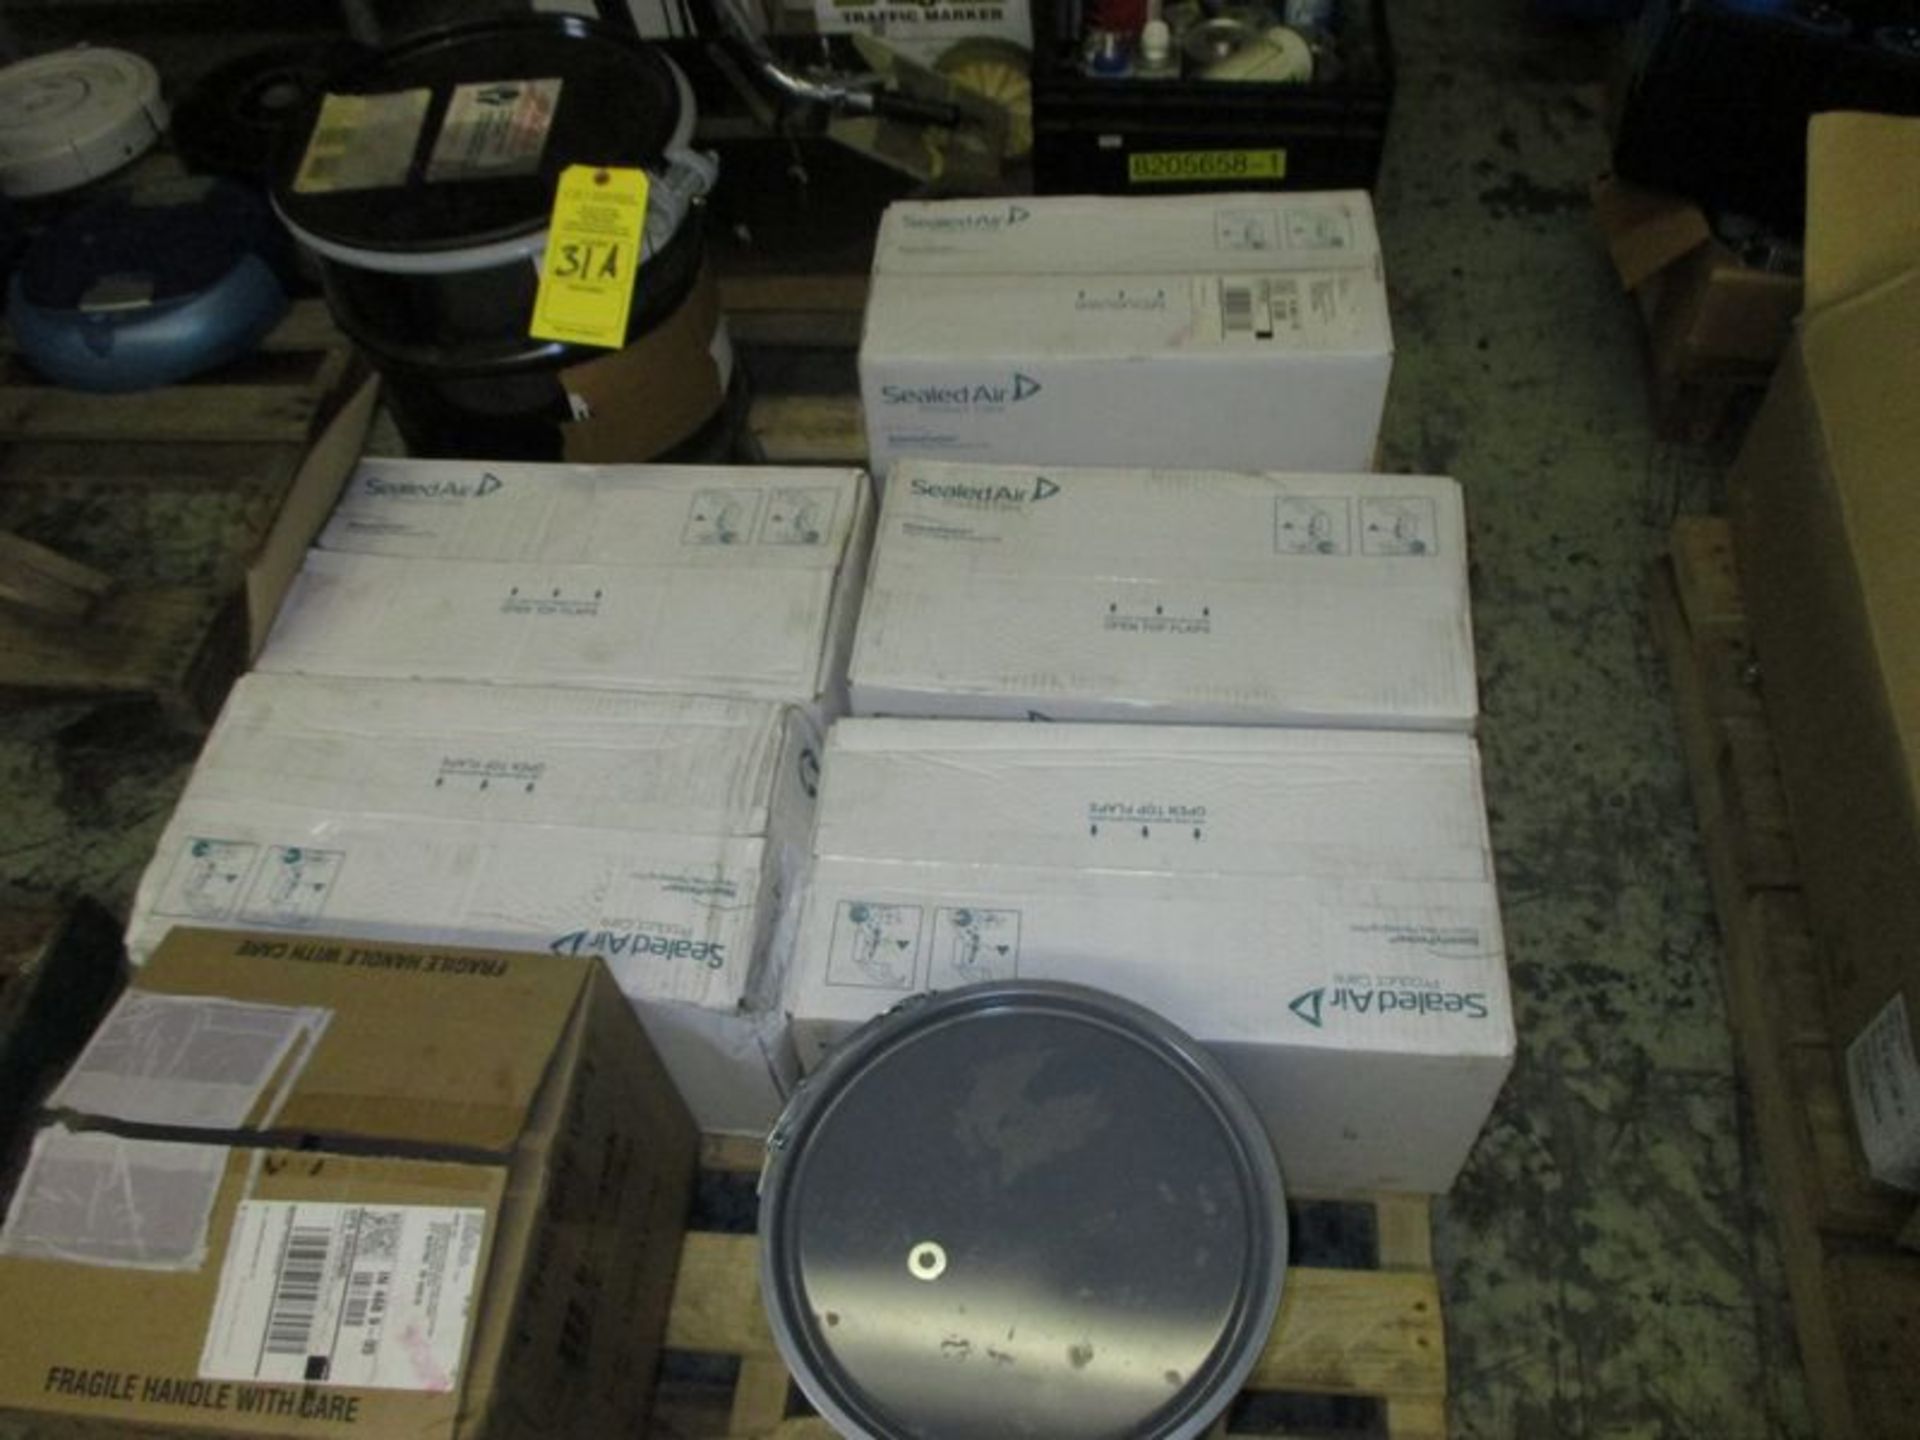 PALLET OF SEALED AIR PRODUCTS FOR SPEEDY PACKER INCLUDING (5) BOXES OF SPI9 47CM SPEEDY PACKER FILM;